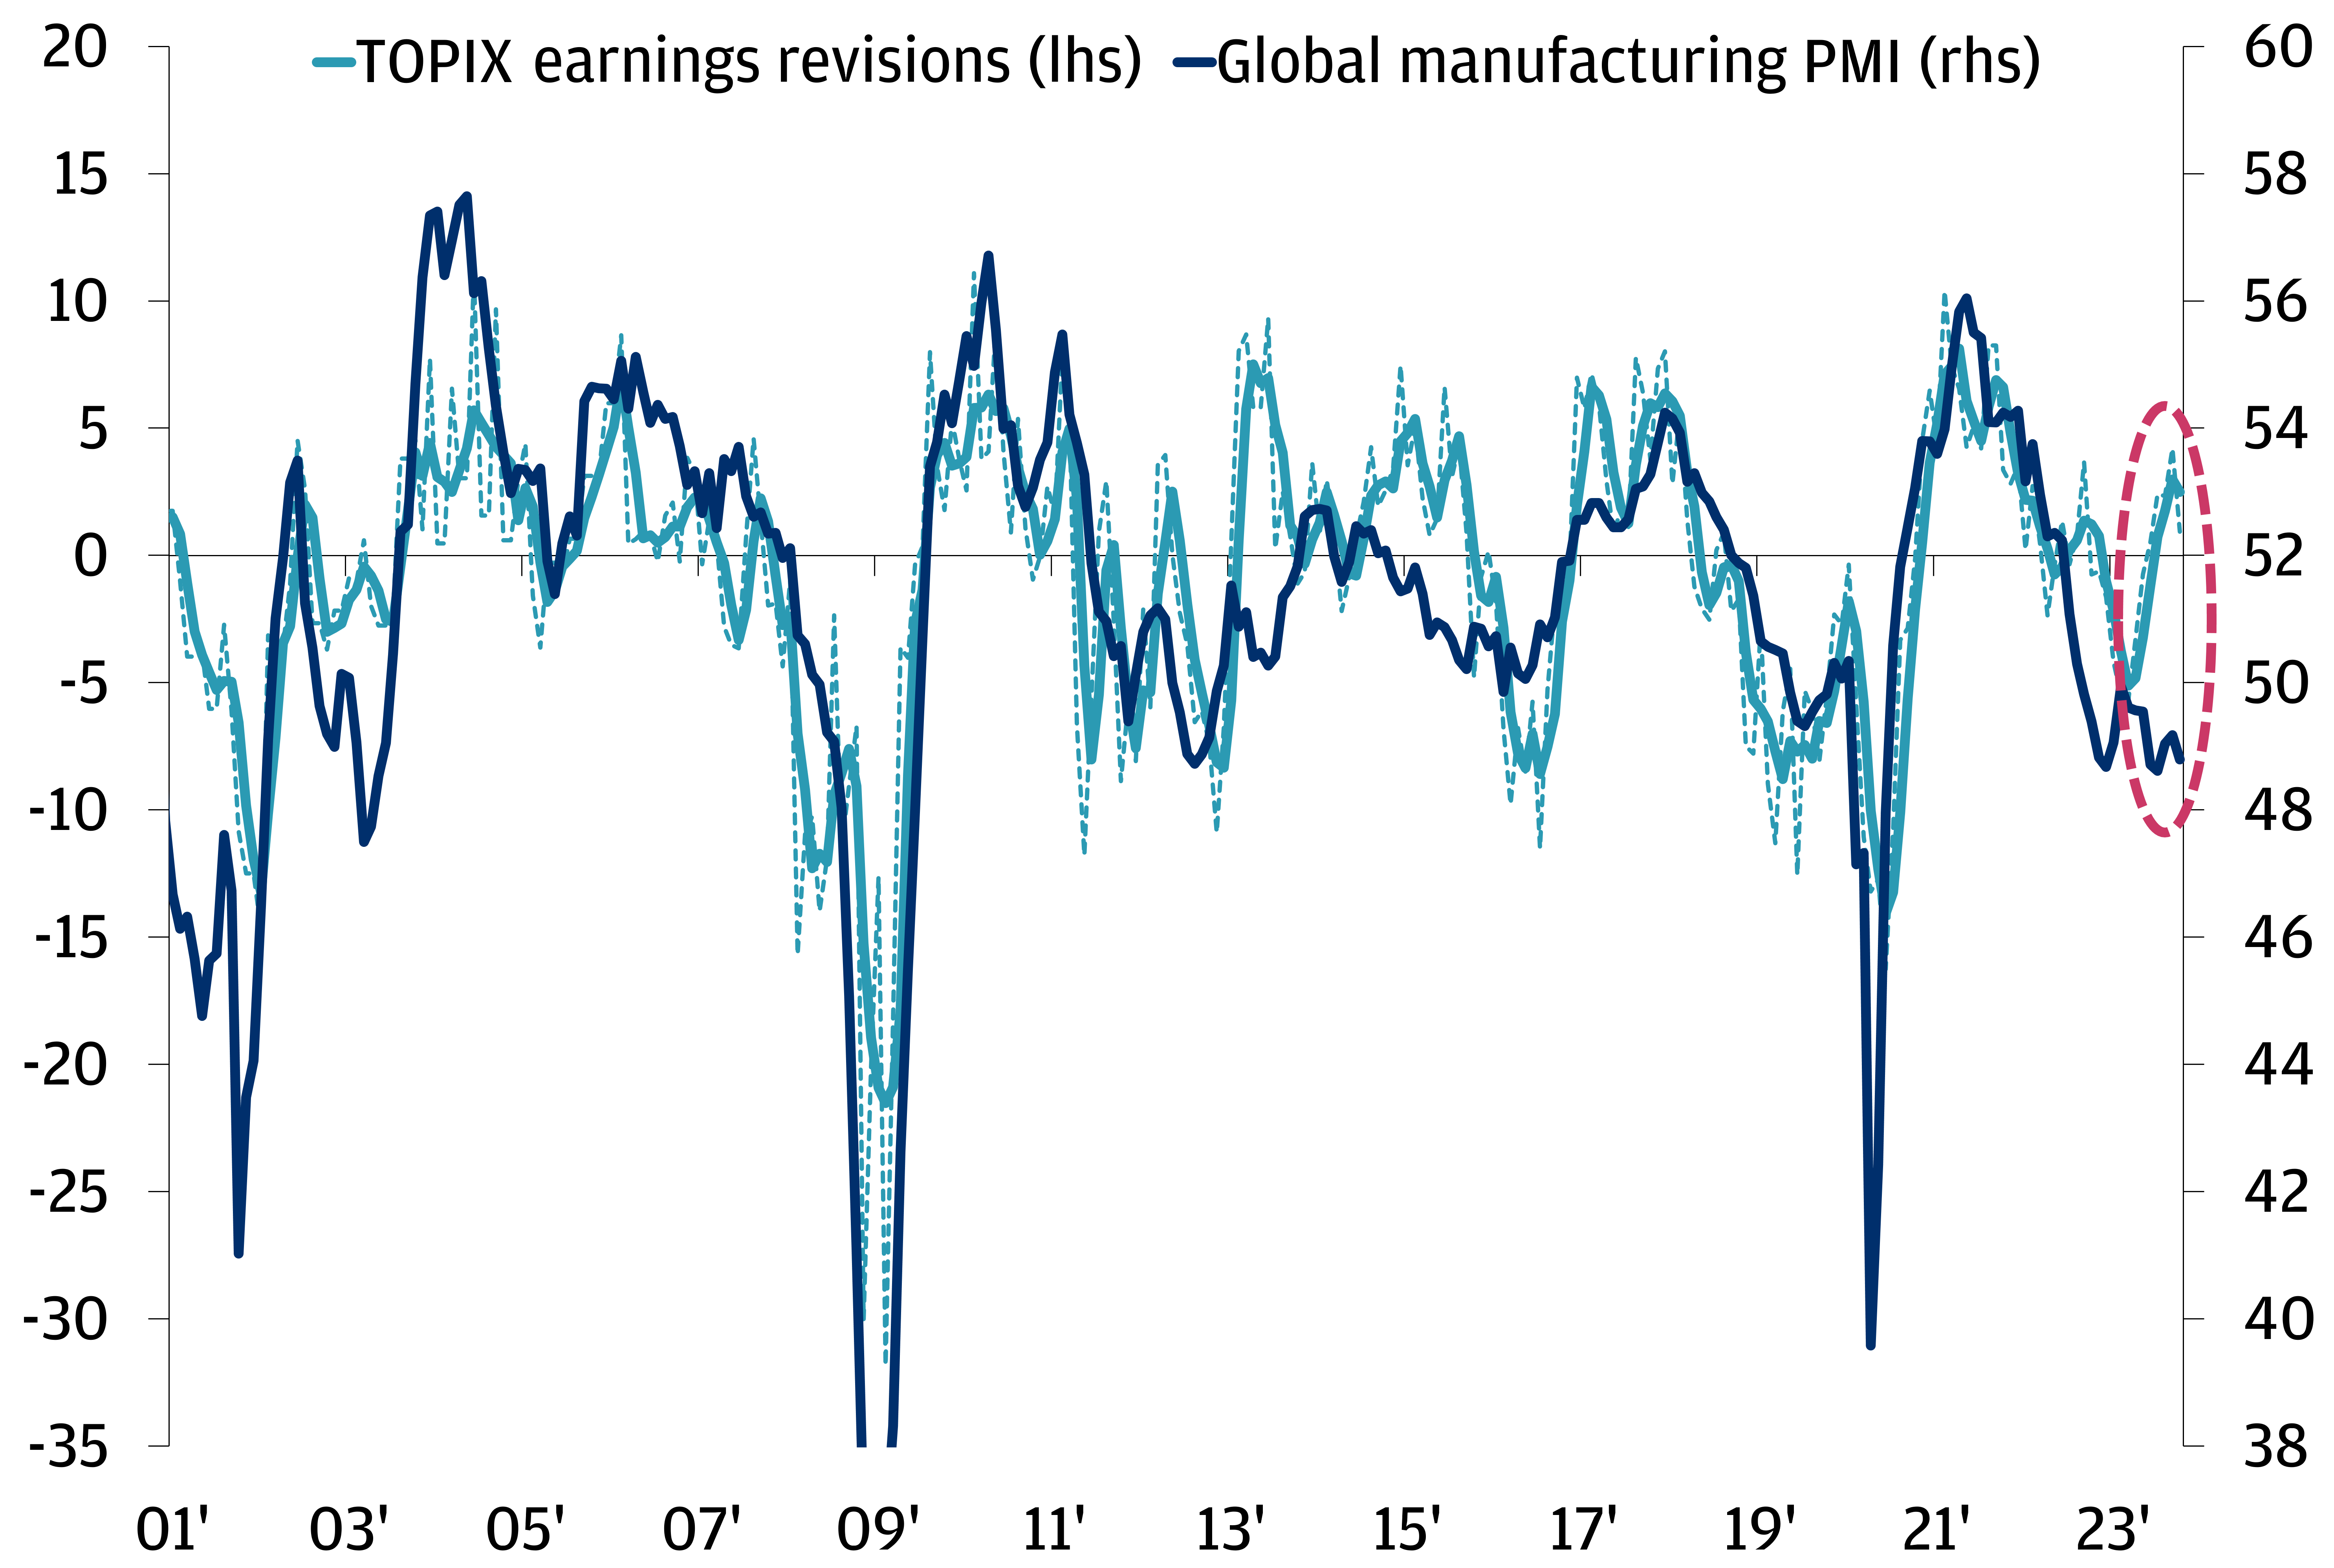 Topix earnings revisions not supported by recent pmi trends 